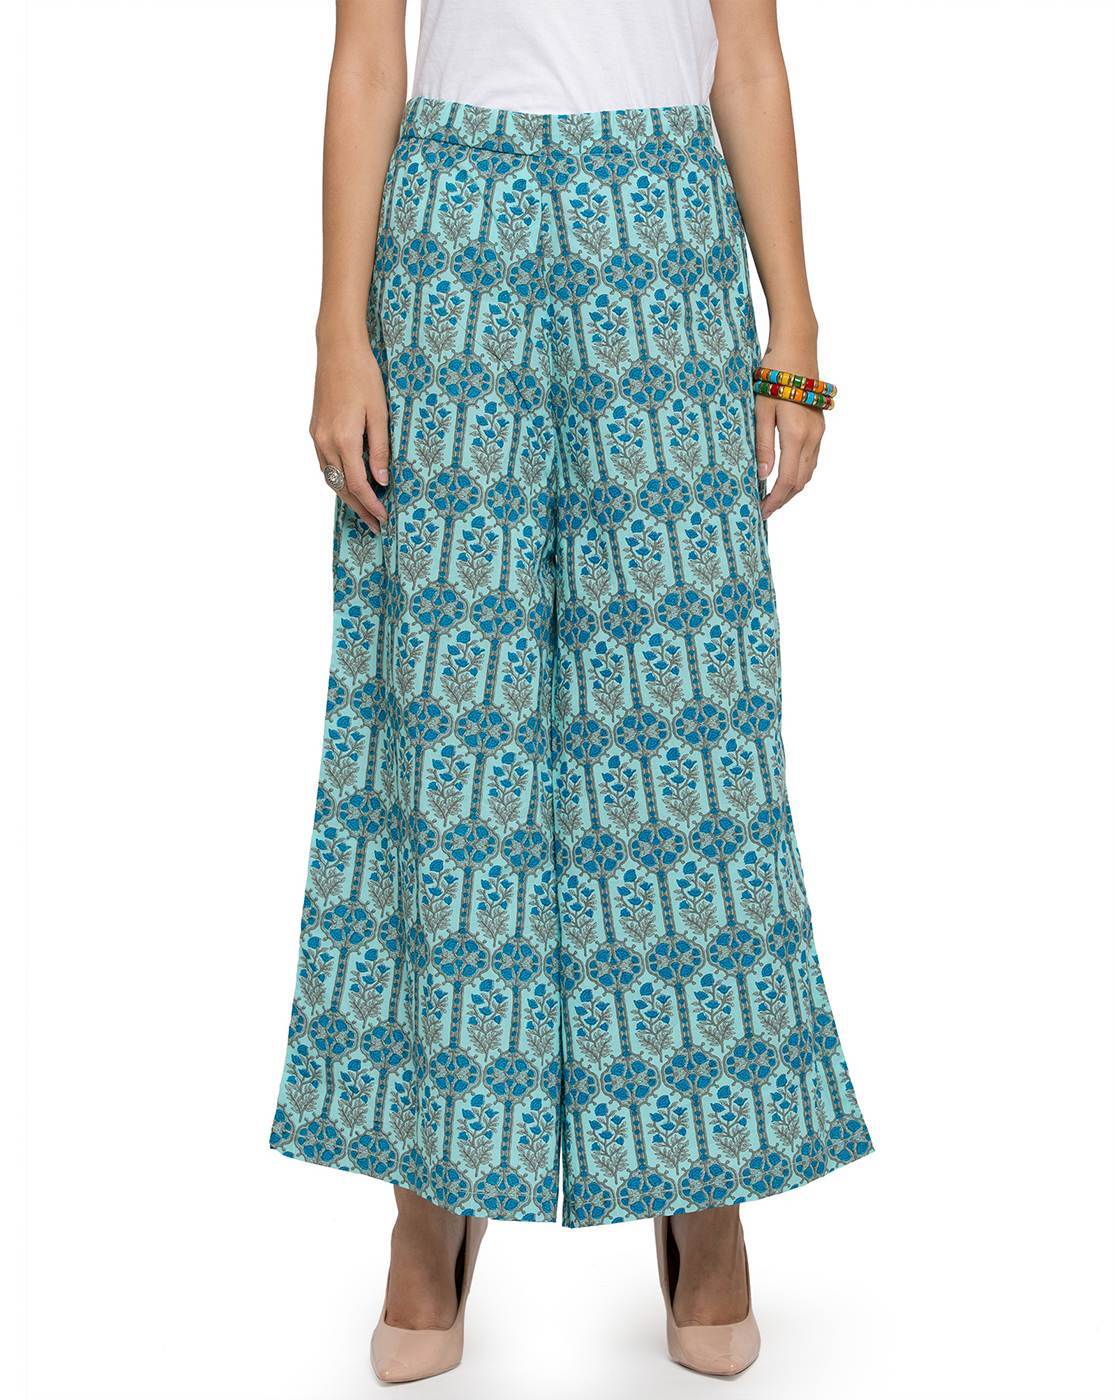 Buy Gold Printed Palazzo Pants Online - W for Woman